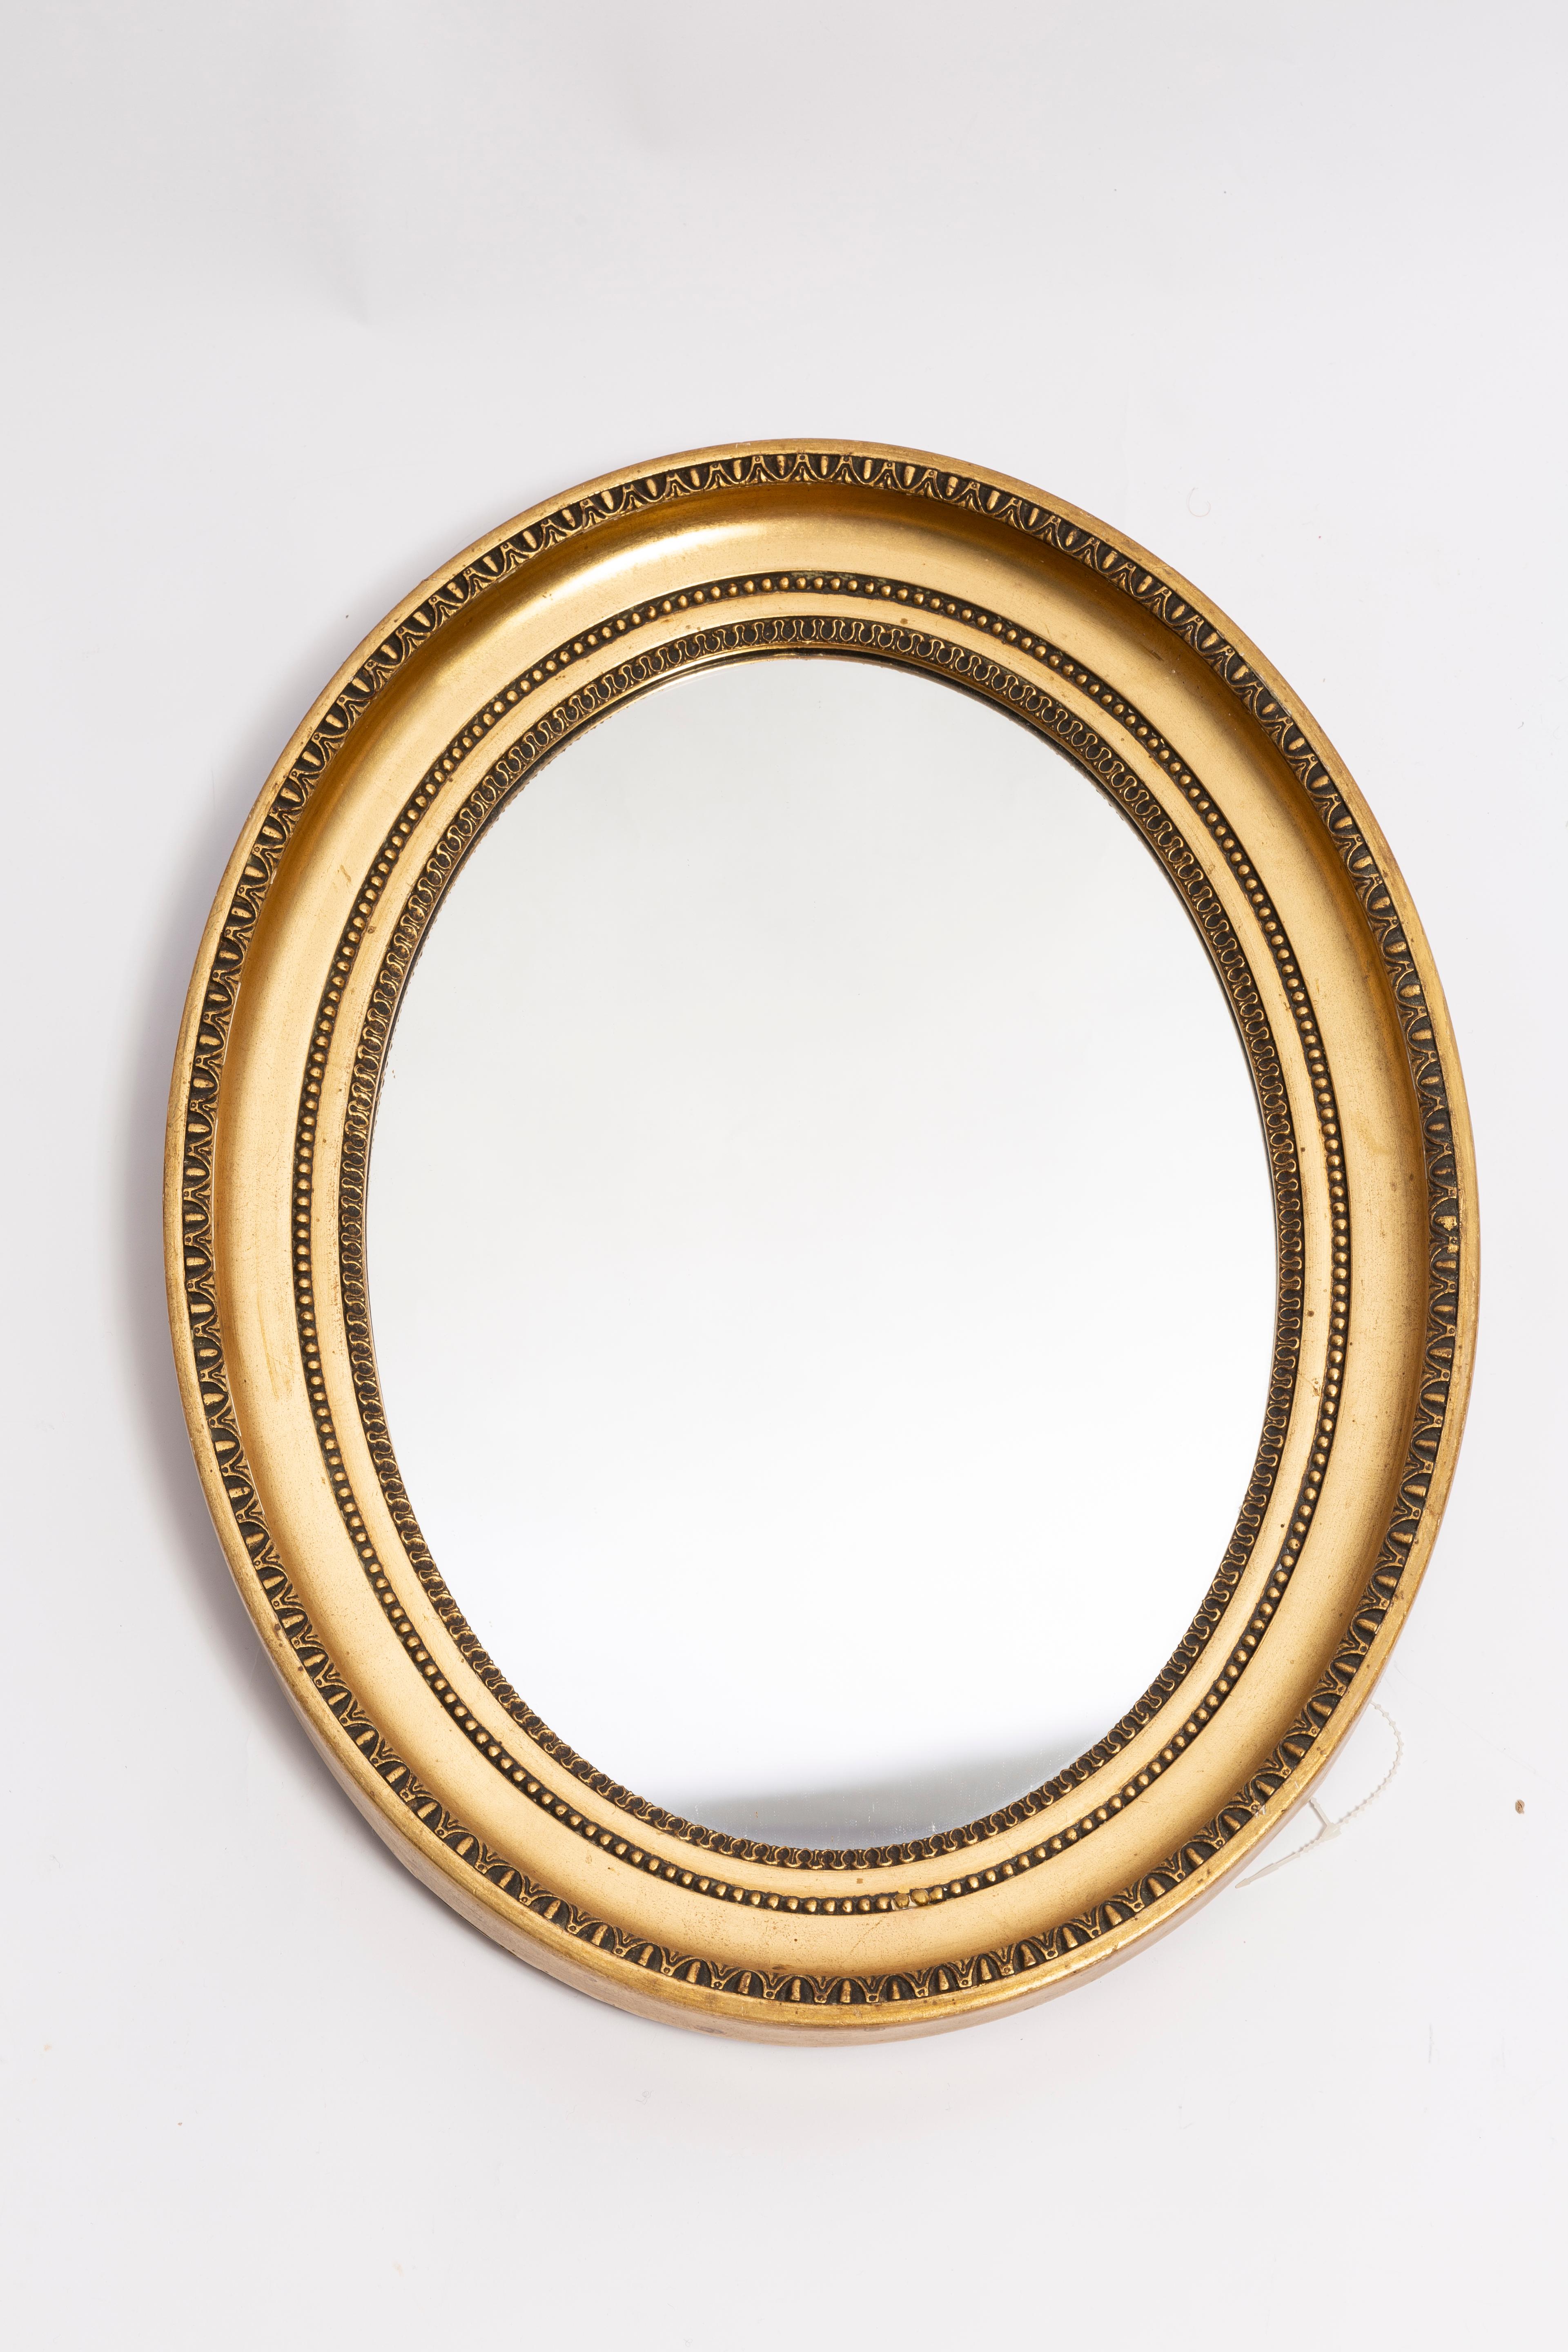 A beautiful big oval mirror in a golden decorative frame with flowers from Italy. The frame is made of wood. Mirror is in very good vintage condition - no damage or cracks in the frame. Original glass. Really unique piece for every interior! Only